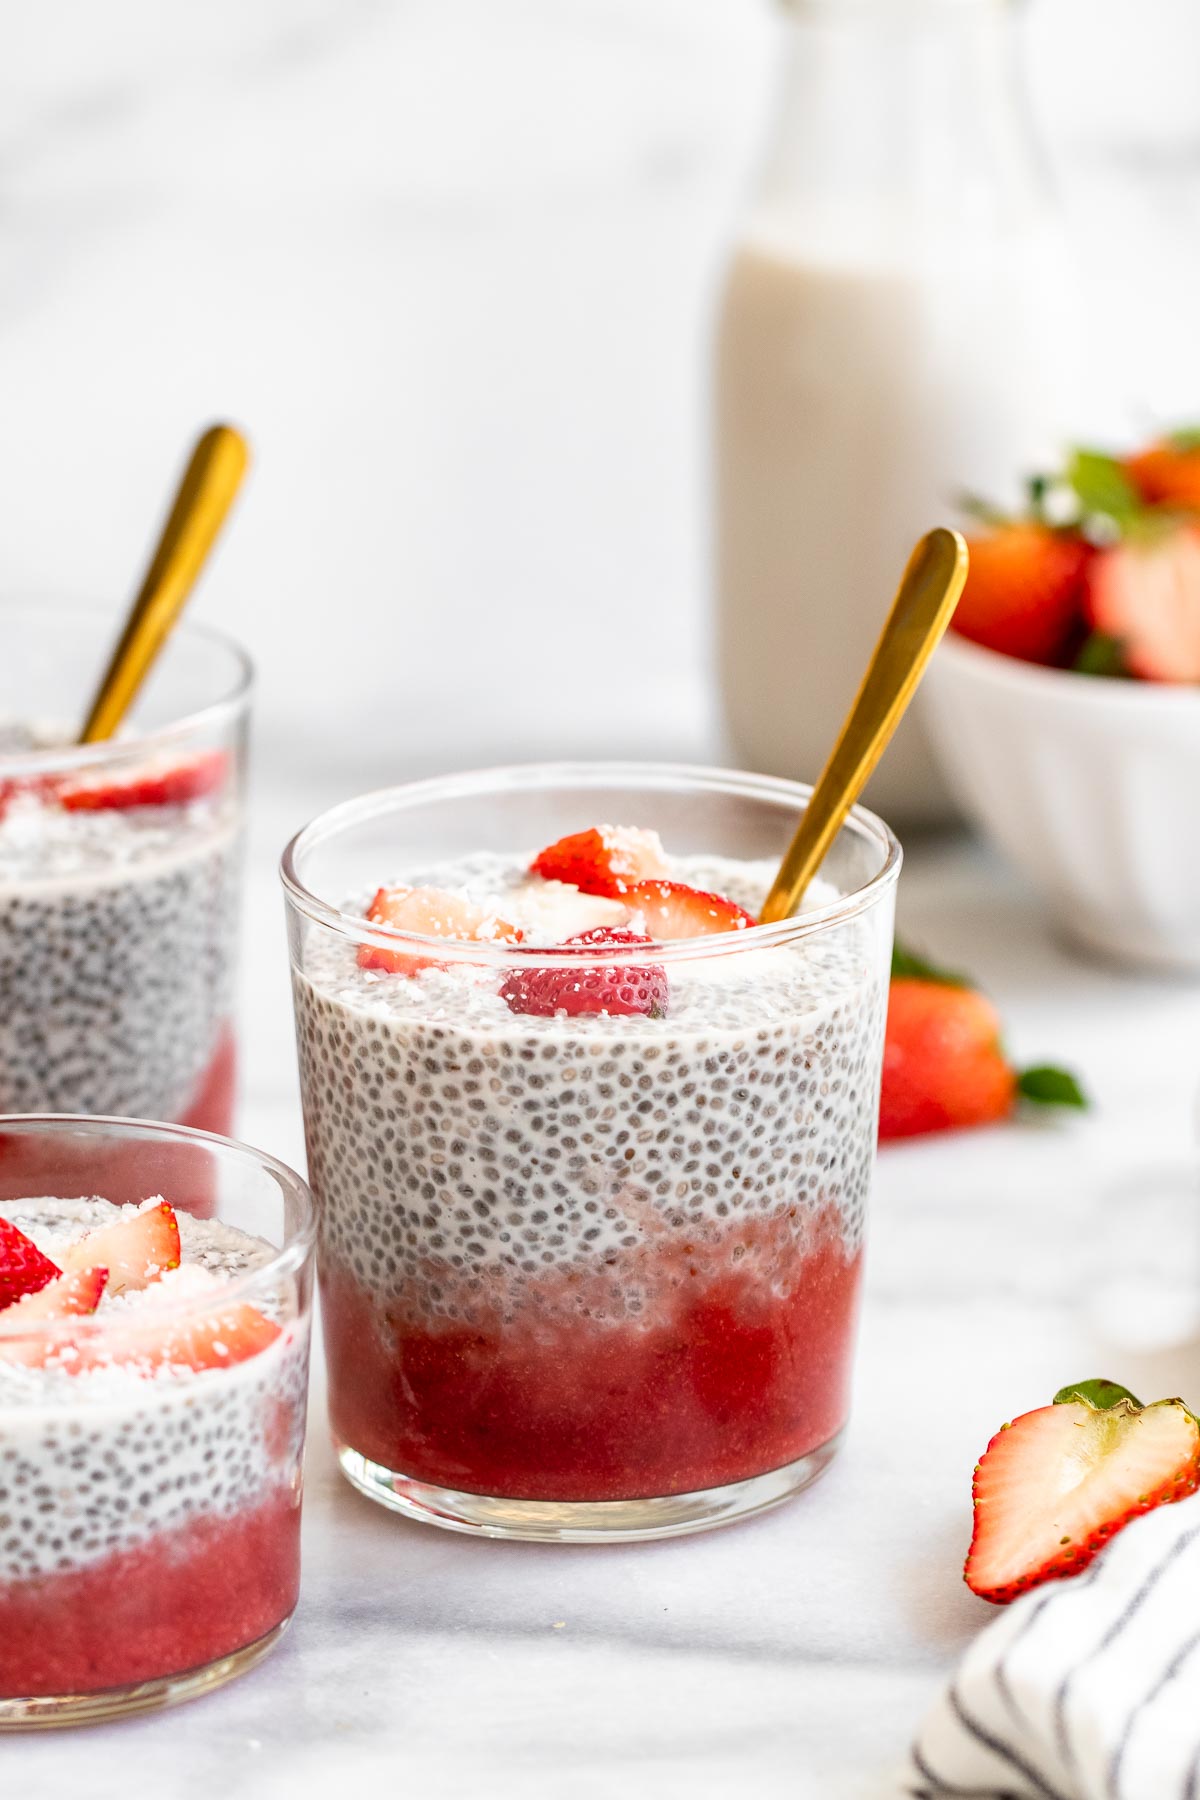 Chia pudding with a layer of strawberry puree on the bottom with a gold spoon on the side.